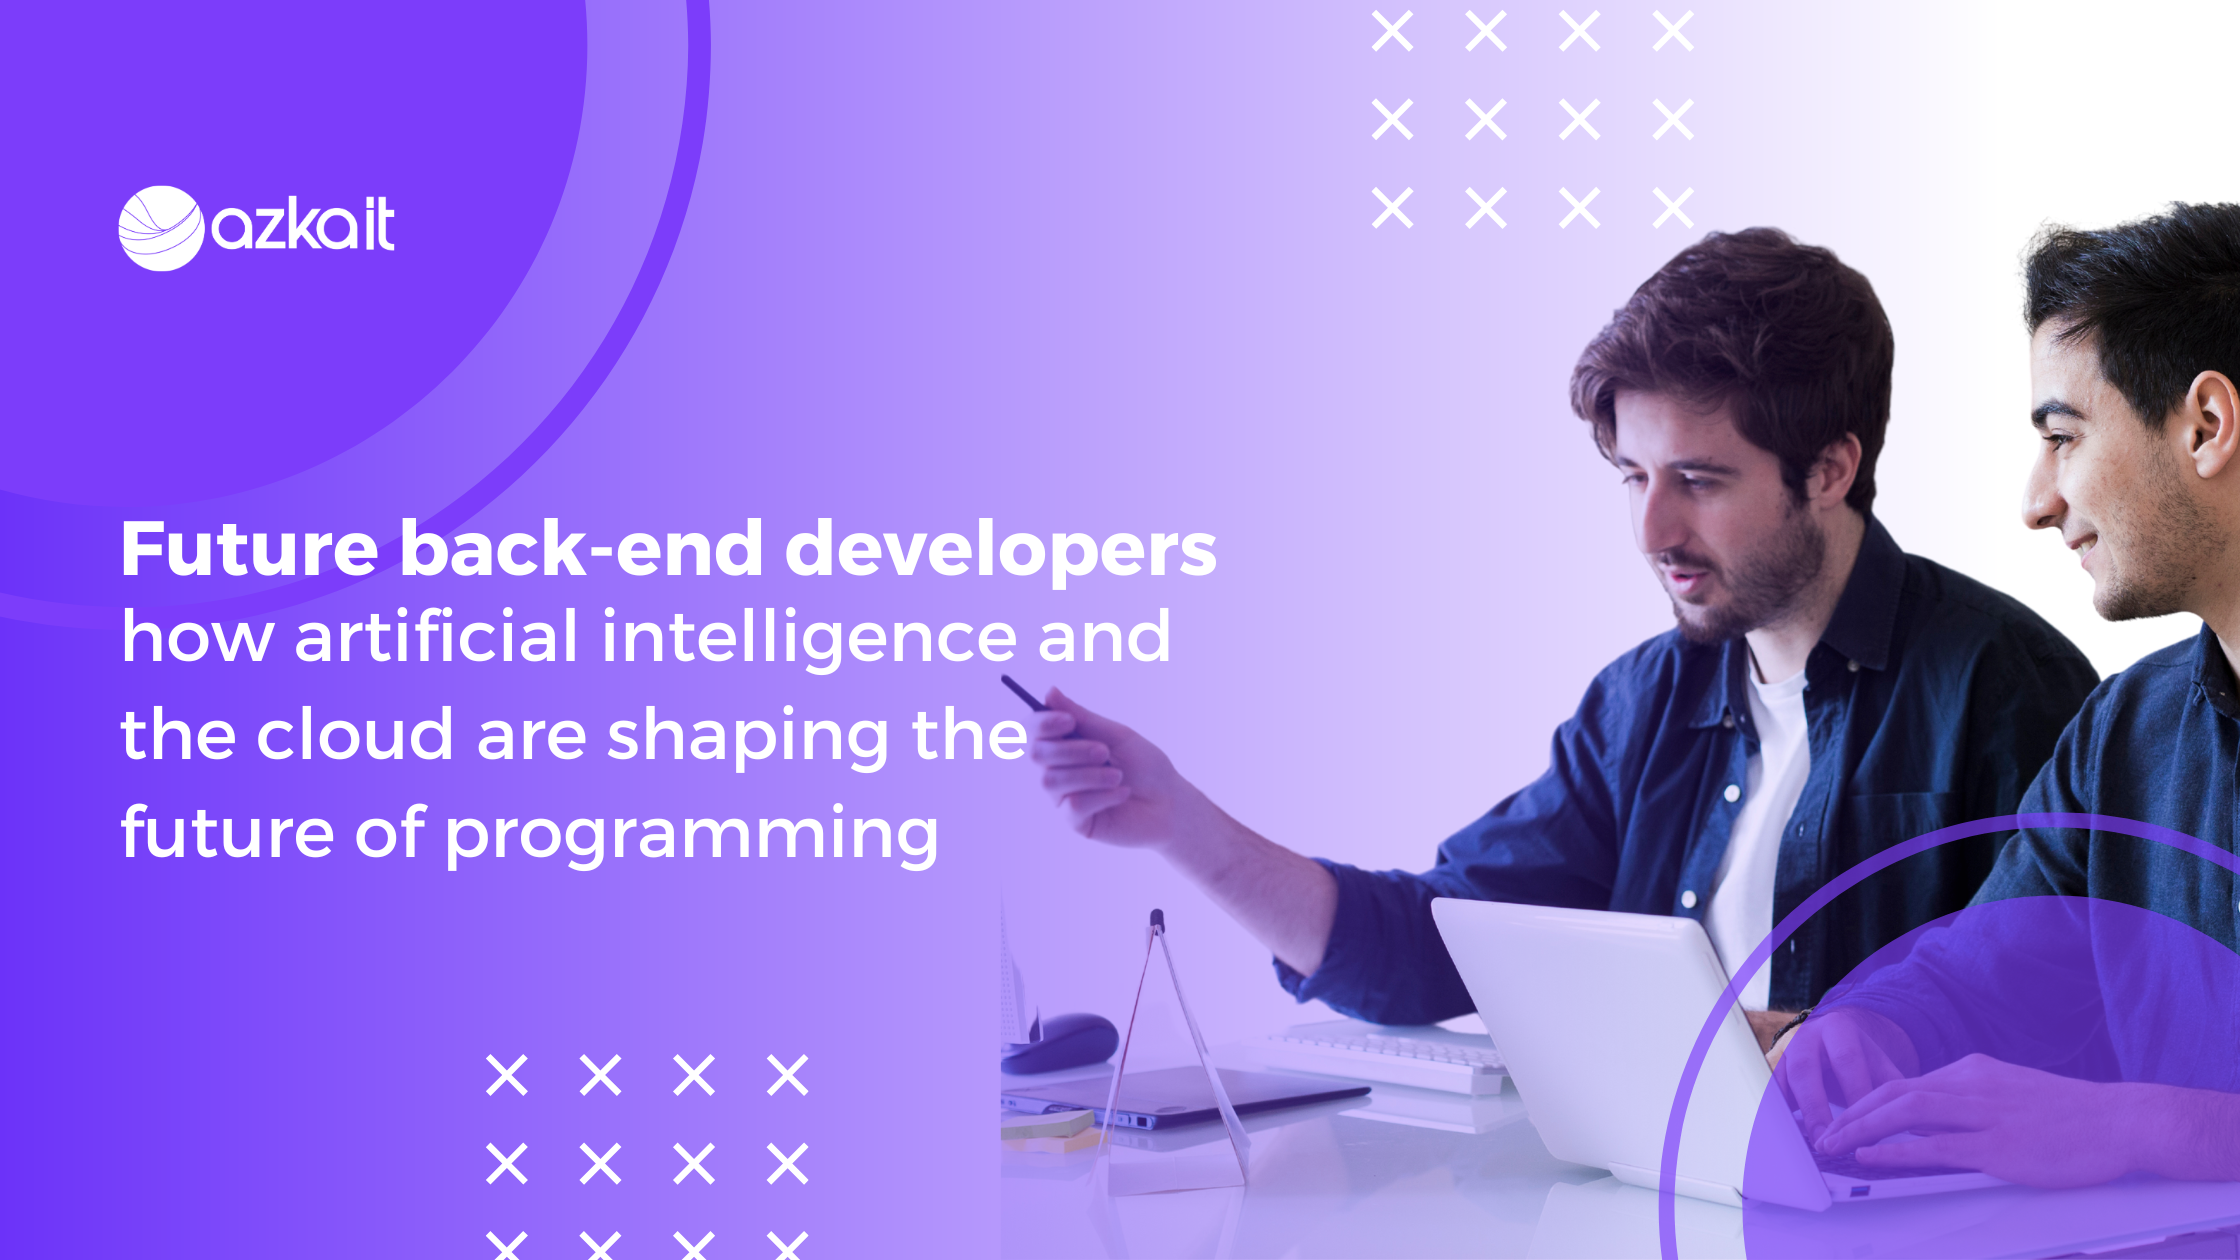 Future back-end developers: how artificial intelligence and the cloud are shaping the future of programming